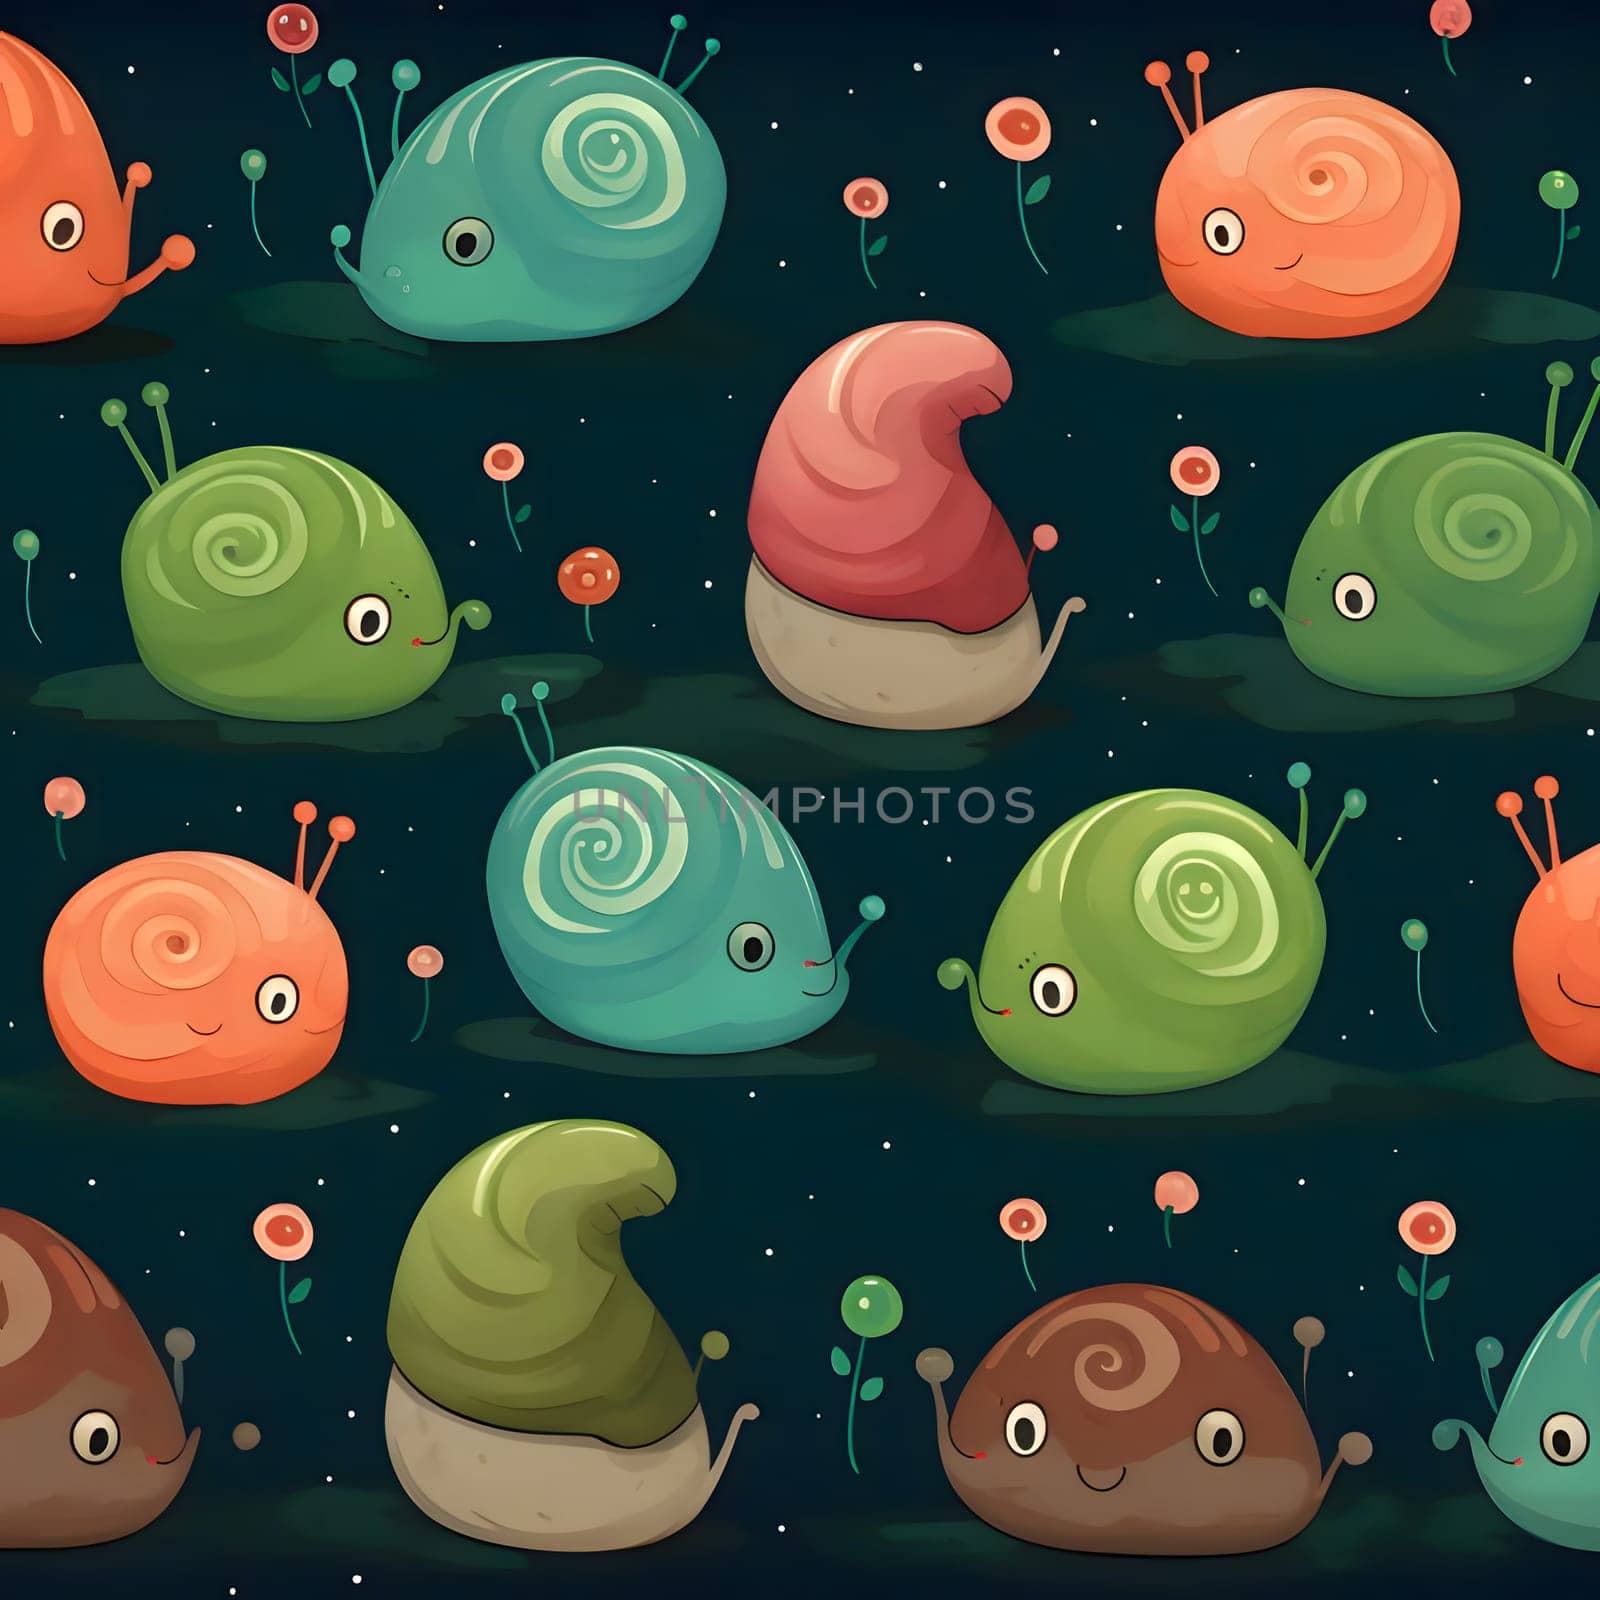 Patterns and banners backgrounds: Seamless pattern with cute snails on the dark background illustration